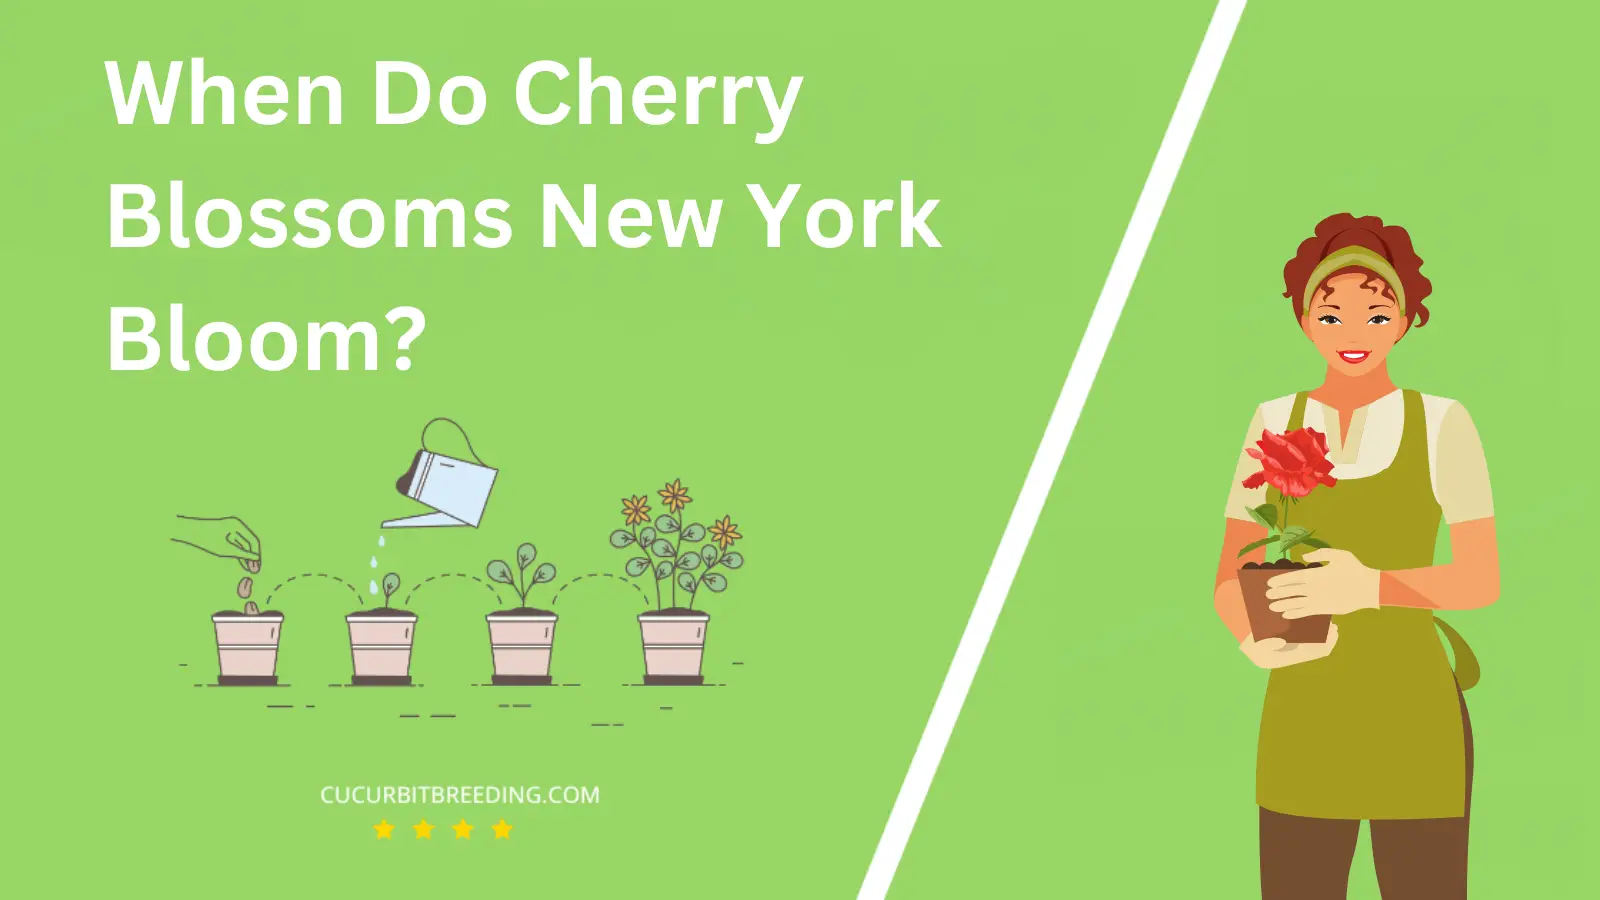 When Do Cherry Blossoms New York Bloom?